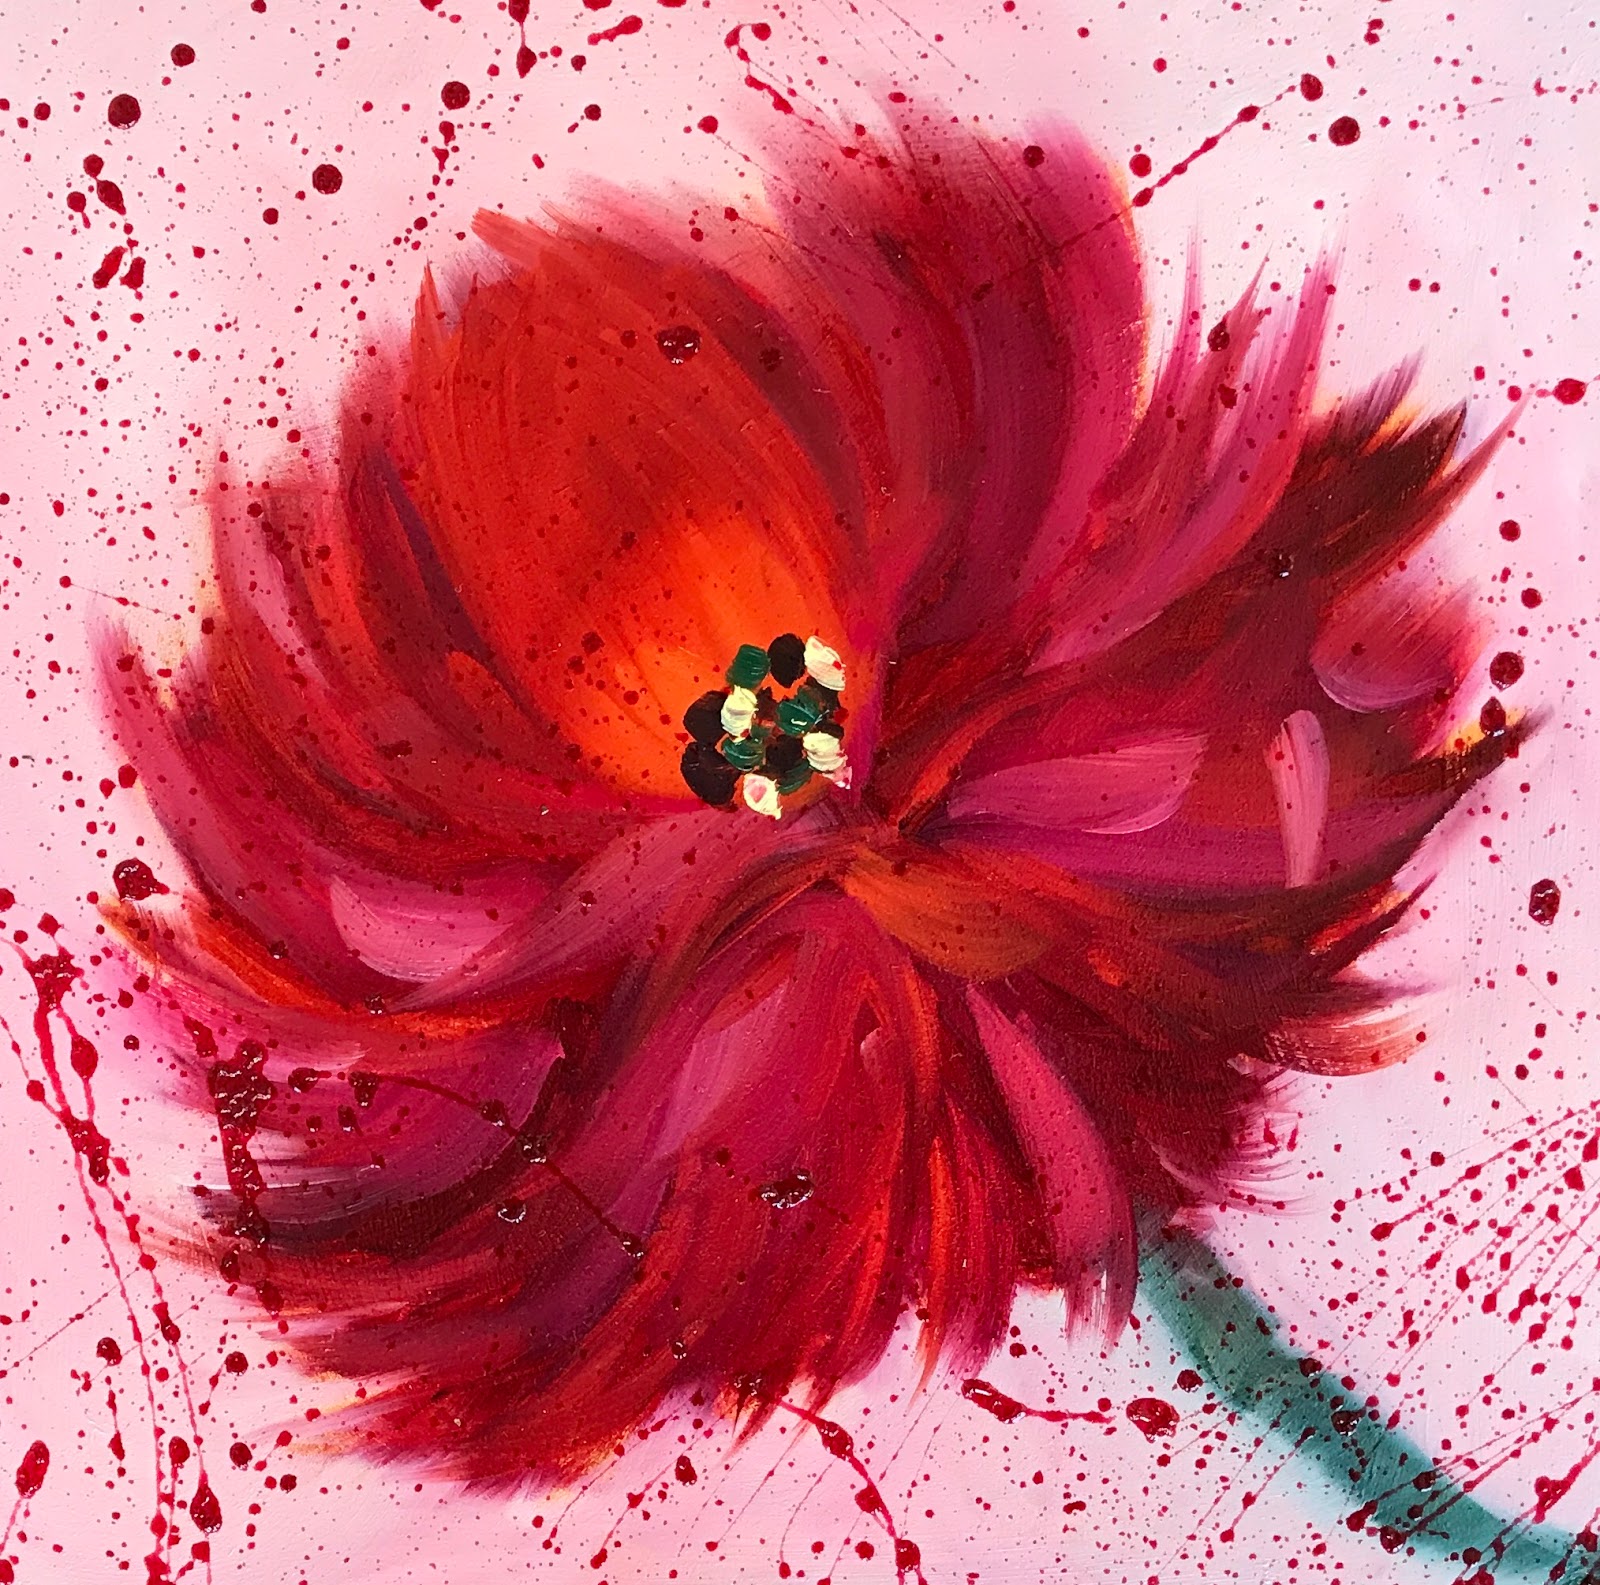 Kimberly Conrad Daily Paintings: Red Peony, Abstract Flower Painting